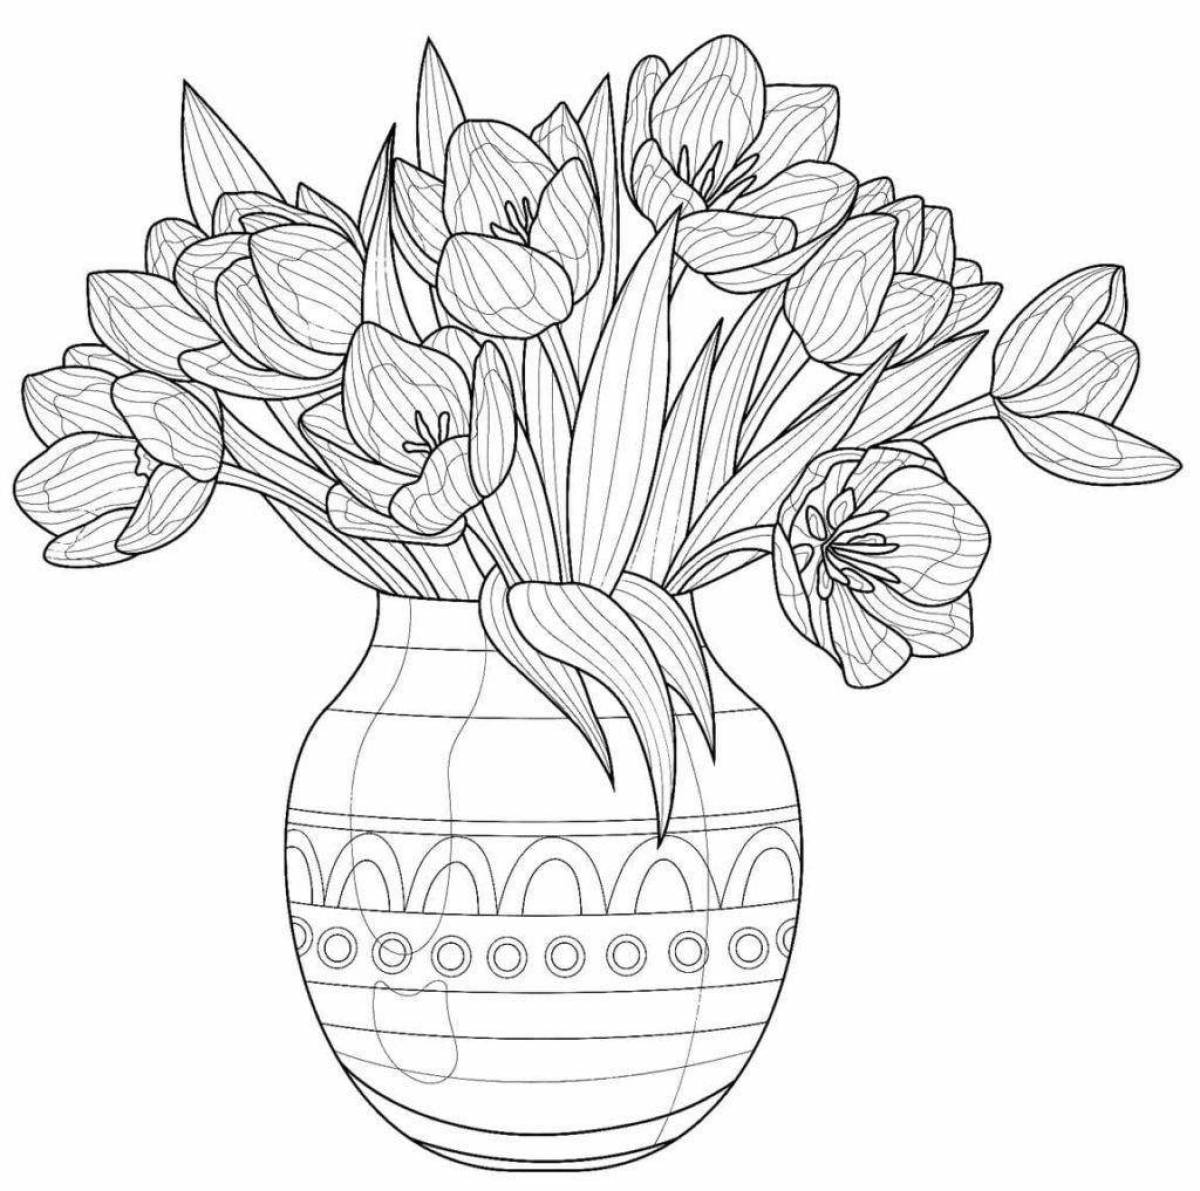 Coloring book exalted flowers in a vase for kids